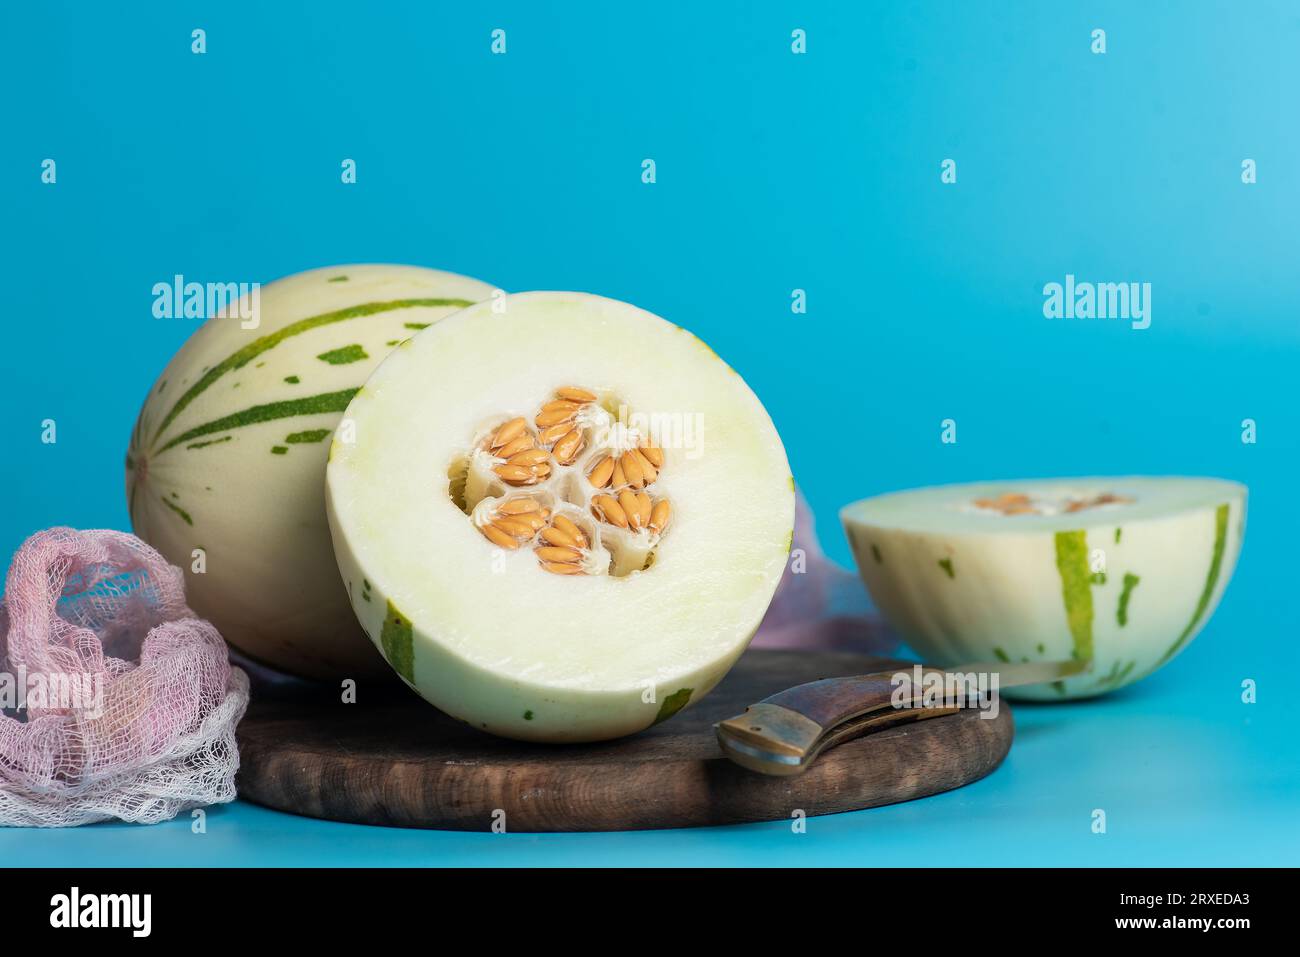 Ivory gaya melon with green dotted stripes and spots on a blue background. Colorful ripe juicy and soft fruit, sweet taste with floral notes. Whole an Stock Photo